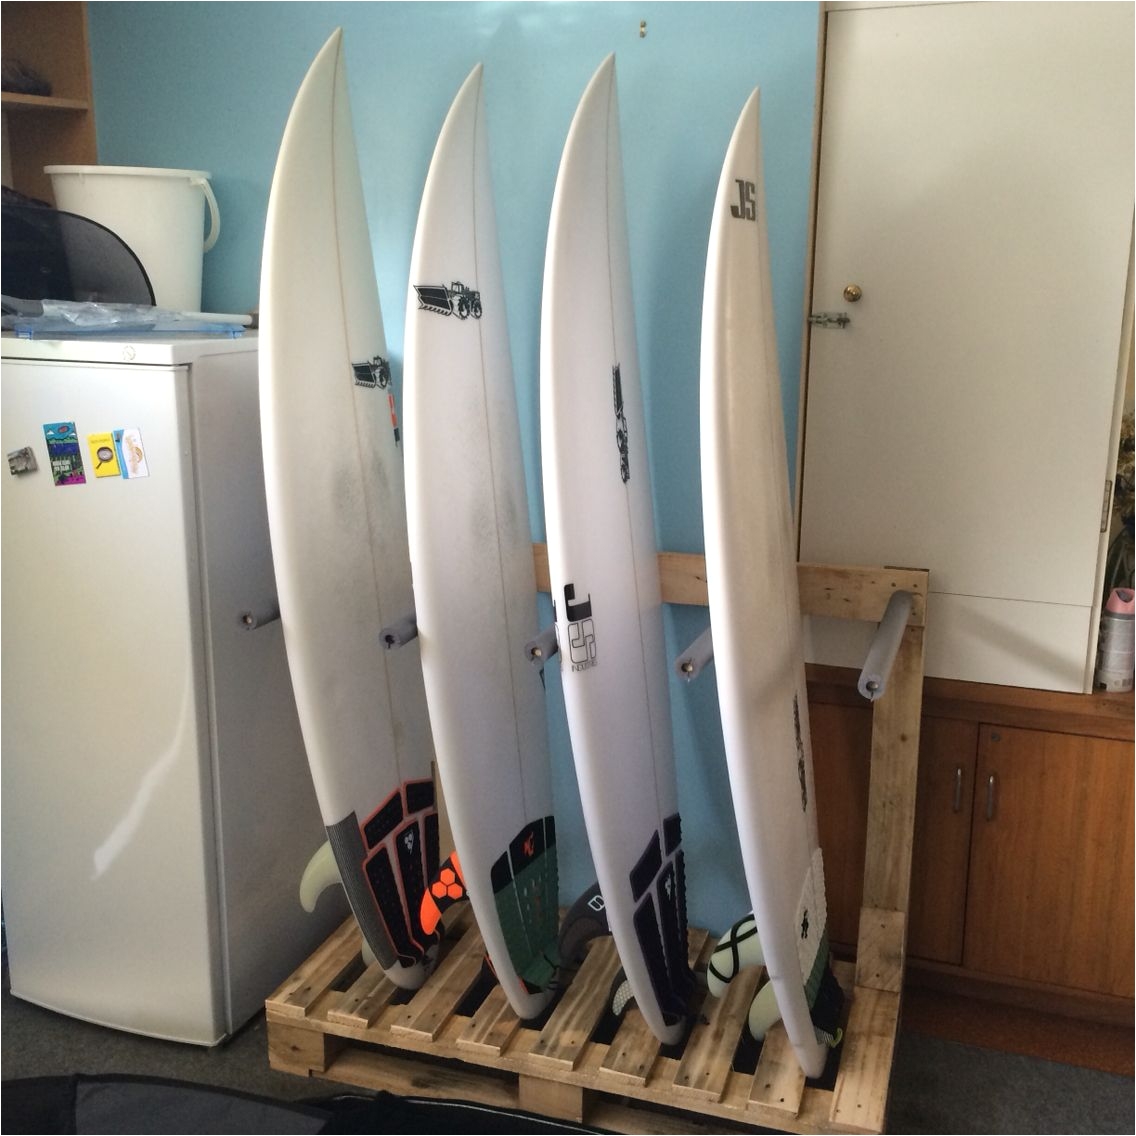 Freestanding Surfboard Display Rack Surfboard Rack Diy From Old Wooden Pallets Up Cycled Garage